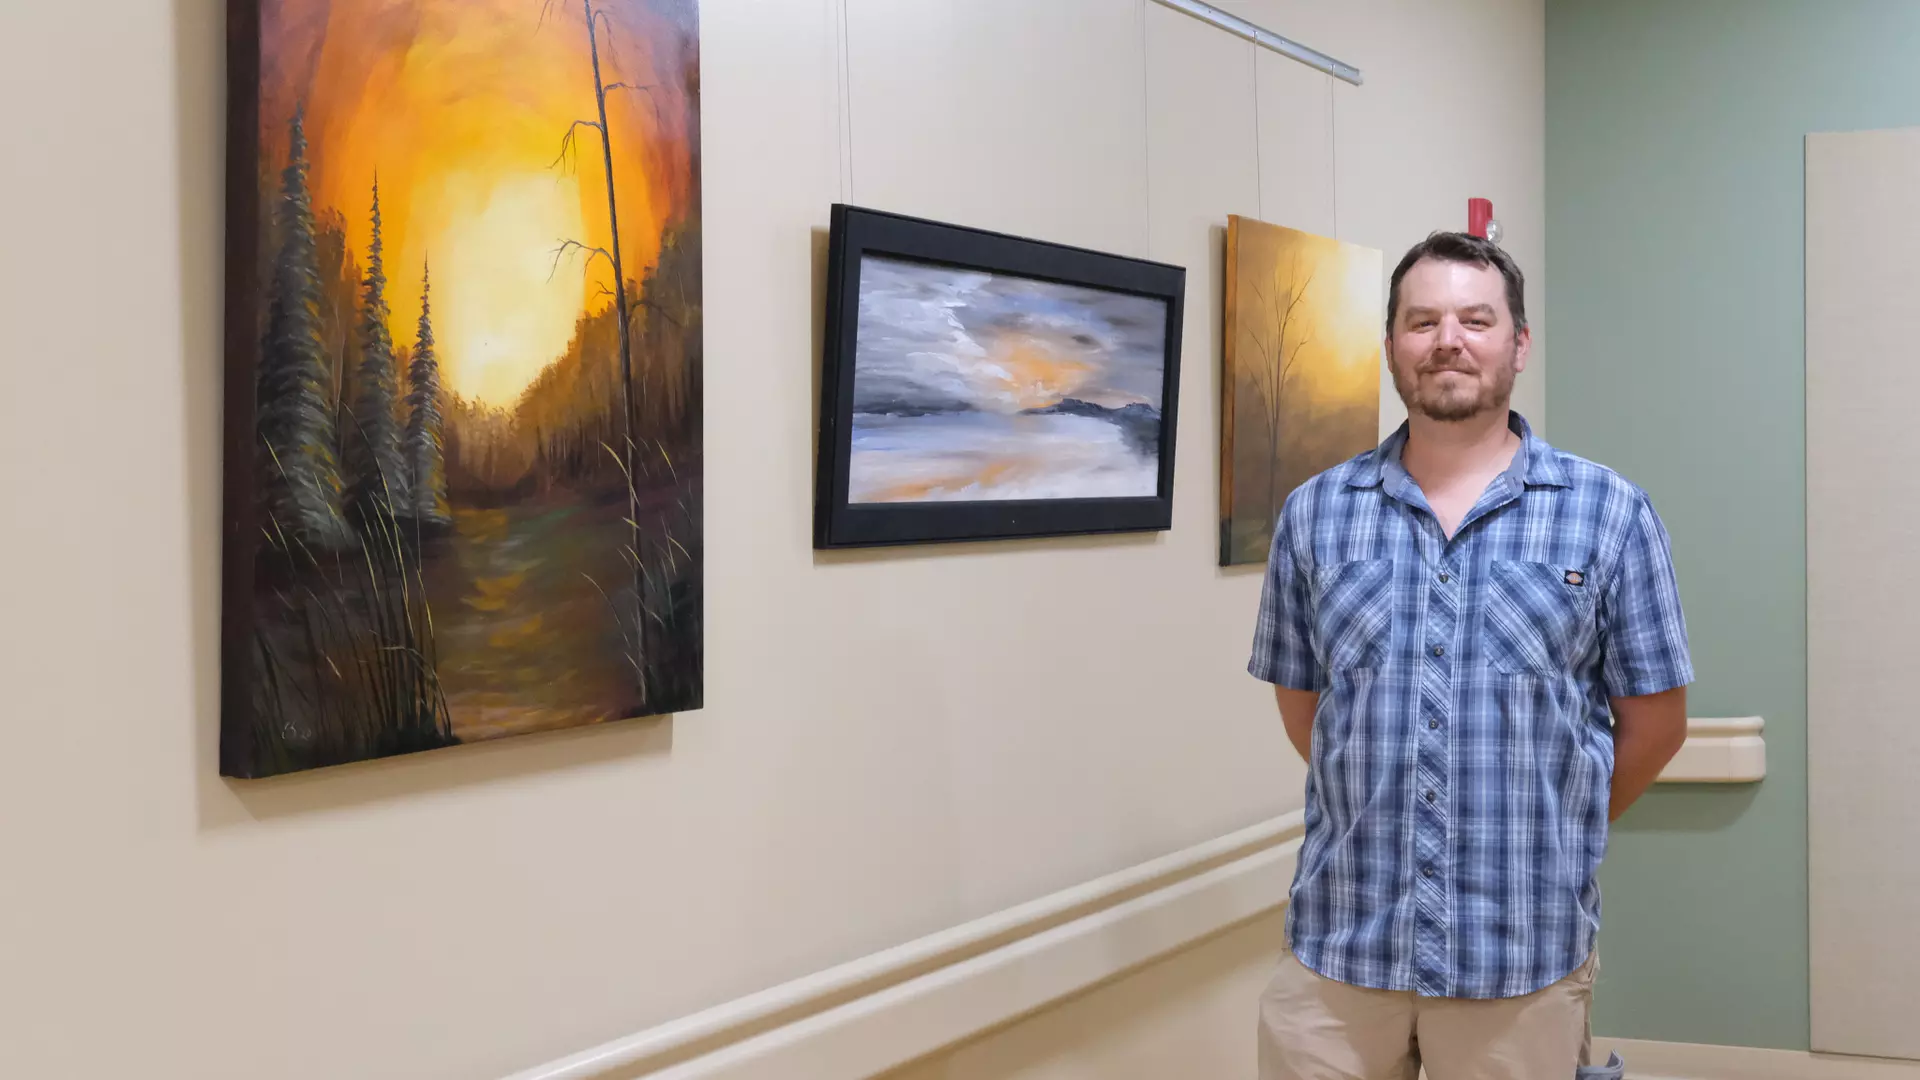 Local artist standing next to his painting in Boscobel hospital hallway.